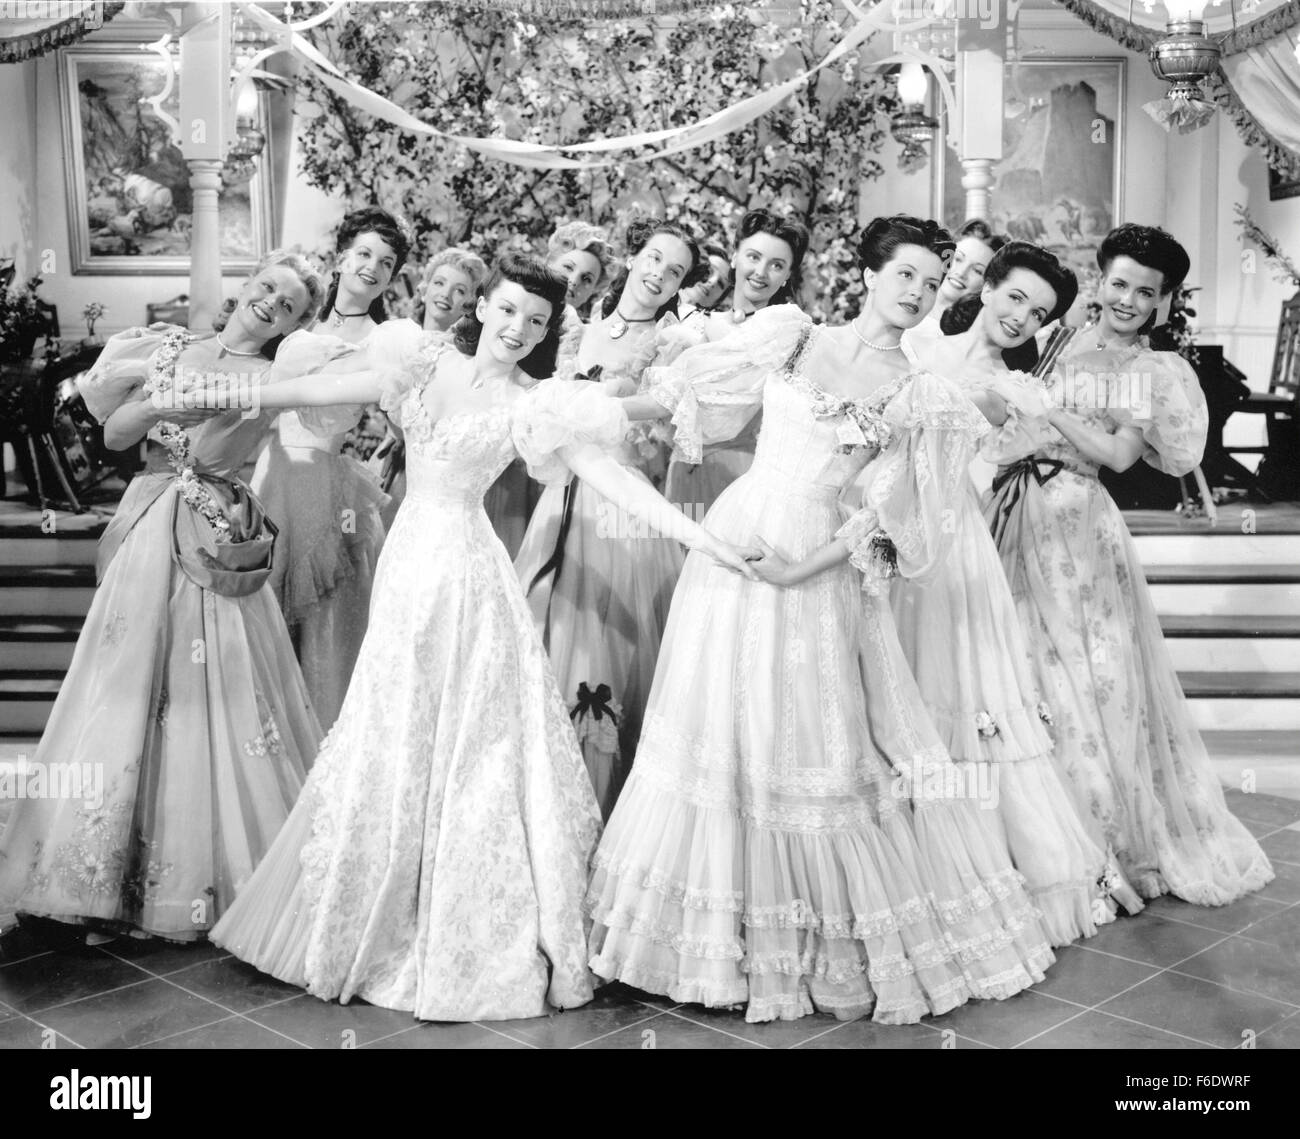 RELEASE DATE: January 18, 1946. MOVIE TITLE: The Harvey Girls. STUDIO: Metro-Goldwyn-Mayer (MGM). PLOT: On a train trip West to become a mail order bride Susan Bradley meets a cheery crew of young women traveling out to open a Harvey House restaurant at a remote whistle stop to provide good cooking and wholesome company for railway travellers. When Susan and her bashful suitor find romance daunting, Susan joins the Harvey Girls instead. The saloon across the street with its alluring worldly-wise women offers them tough competition, fair and foul, and Susan catches the eye of the Ned Trent, Stock Photo